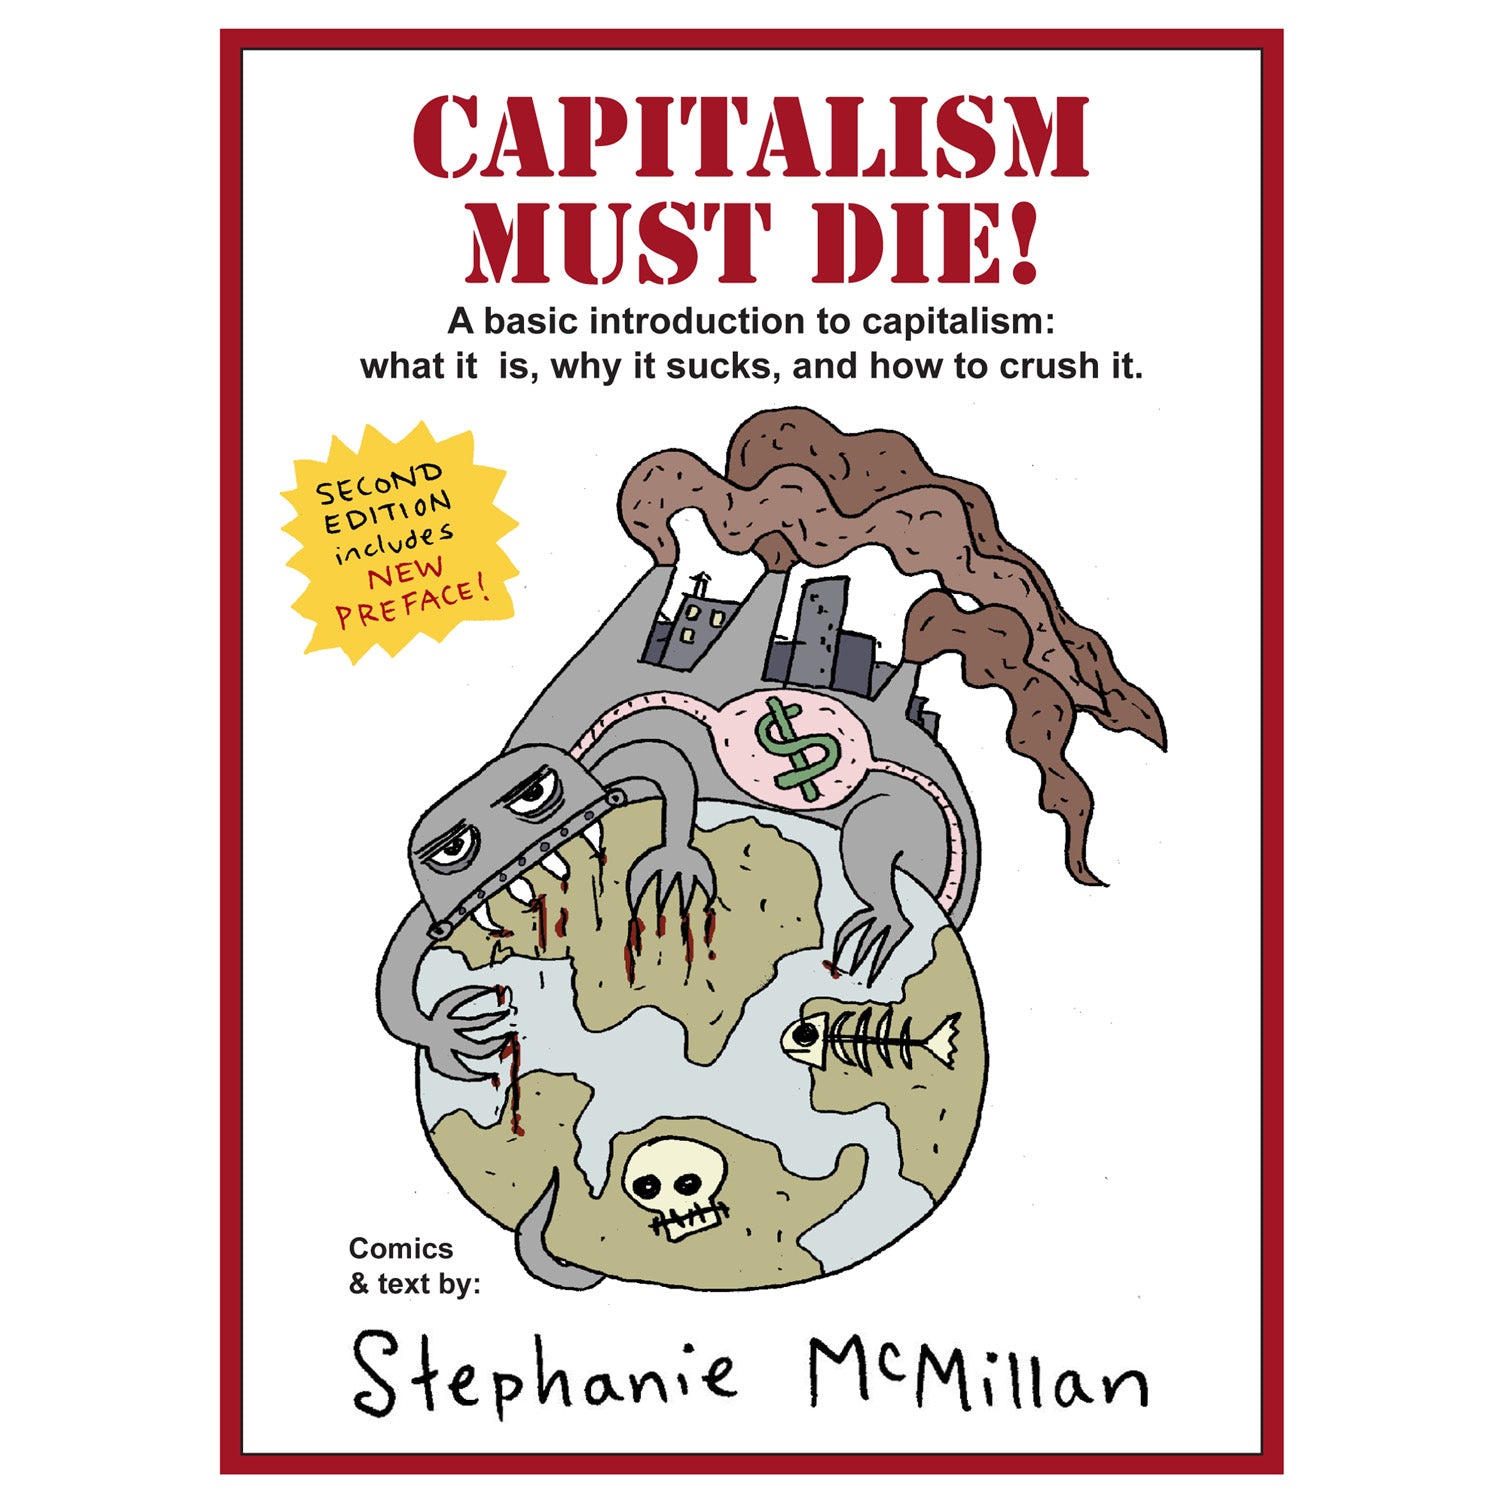 Capitalism Must Die! A Basic Introduction to Capitalism: What It Is, Why It Sucks, and How to Crush It